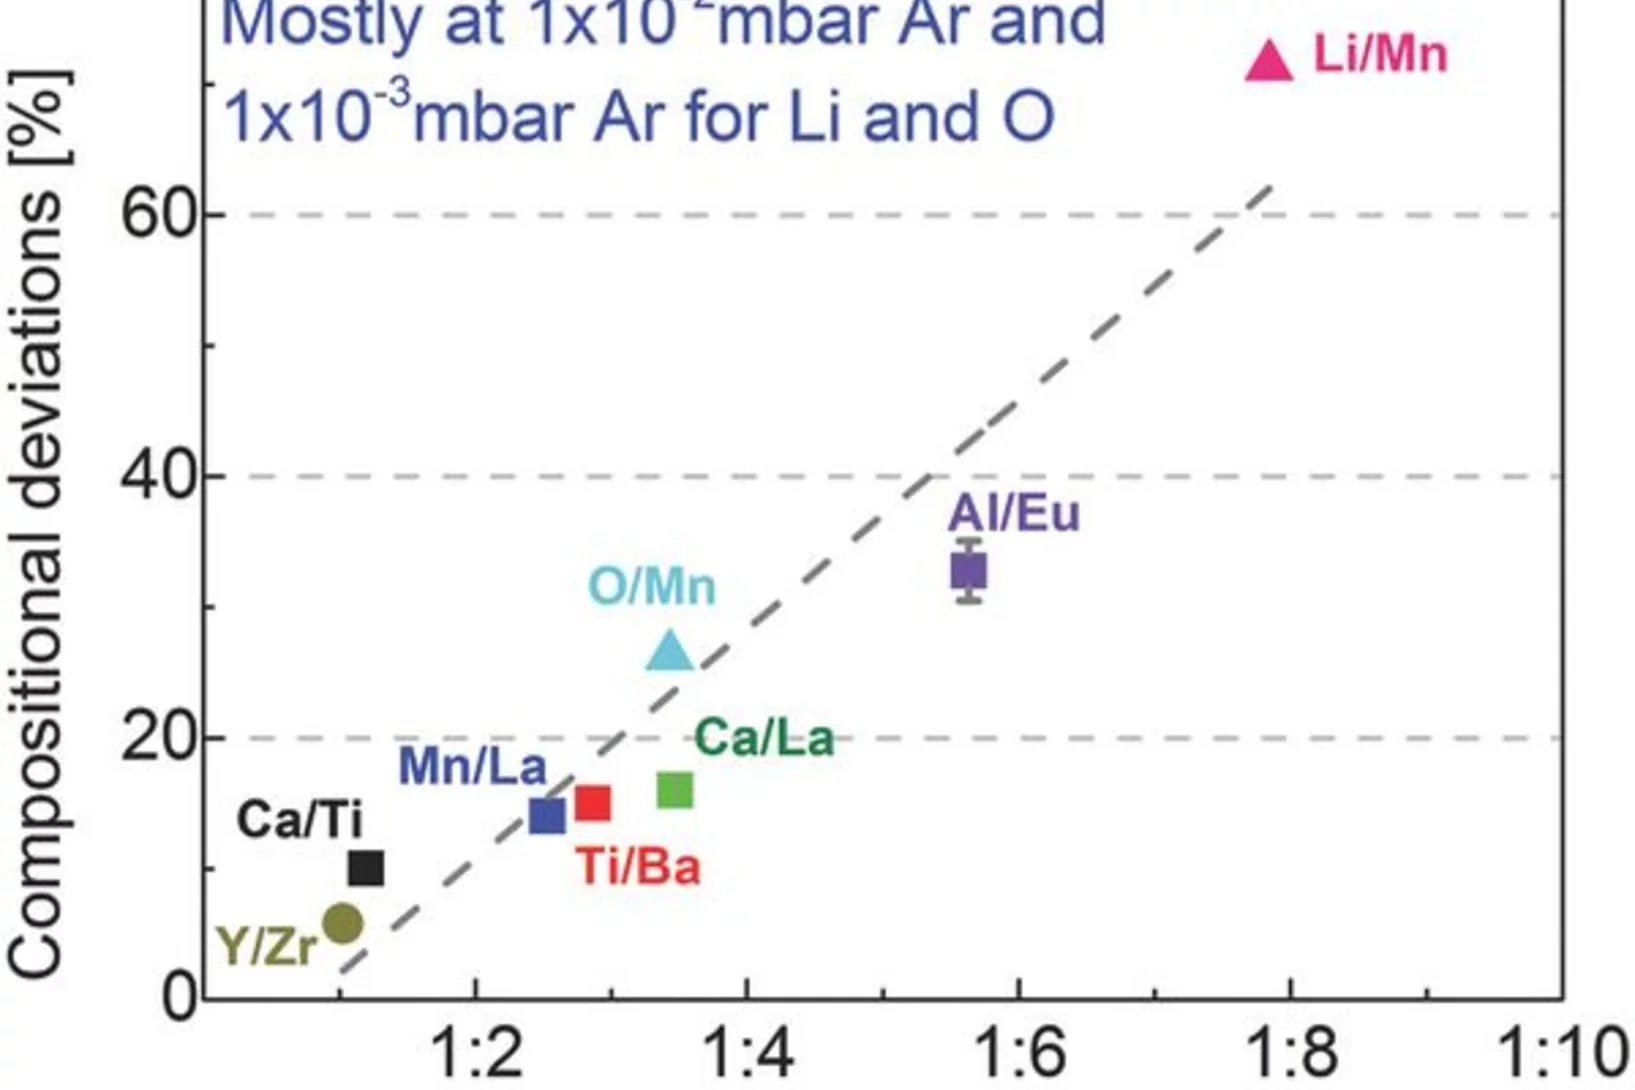 Maximum compositional deviations at PLD relevant angular areas (±10°) versus mass‐ratios, mainly for 1 × 10−2 mbar Ar. Except for O/Mn and Li/Mn in which the maximum deviations already appear at 1 × 10−3 mbar Ar. Symbols ◼ are for RBS measurements, ▴ for ERDA measurements, and ● for data from ref. 30. Note: O/Mn deviation has a high uncertainty due to the suspicion of ambient water trapping by the amorphous film. Error bars are smaller than the symbols except for EuAlO3. (from Figure 5)